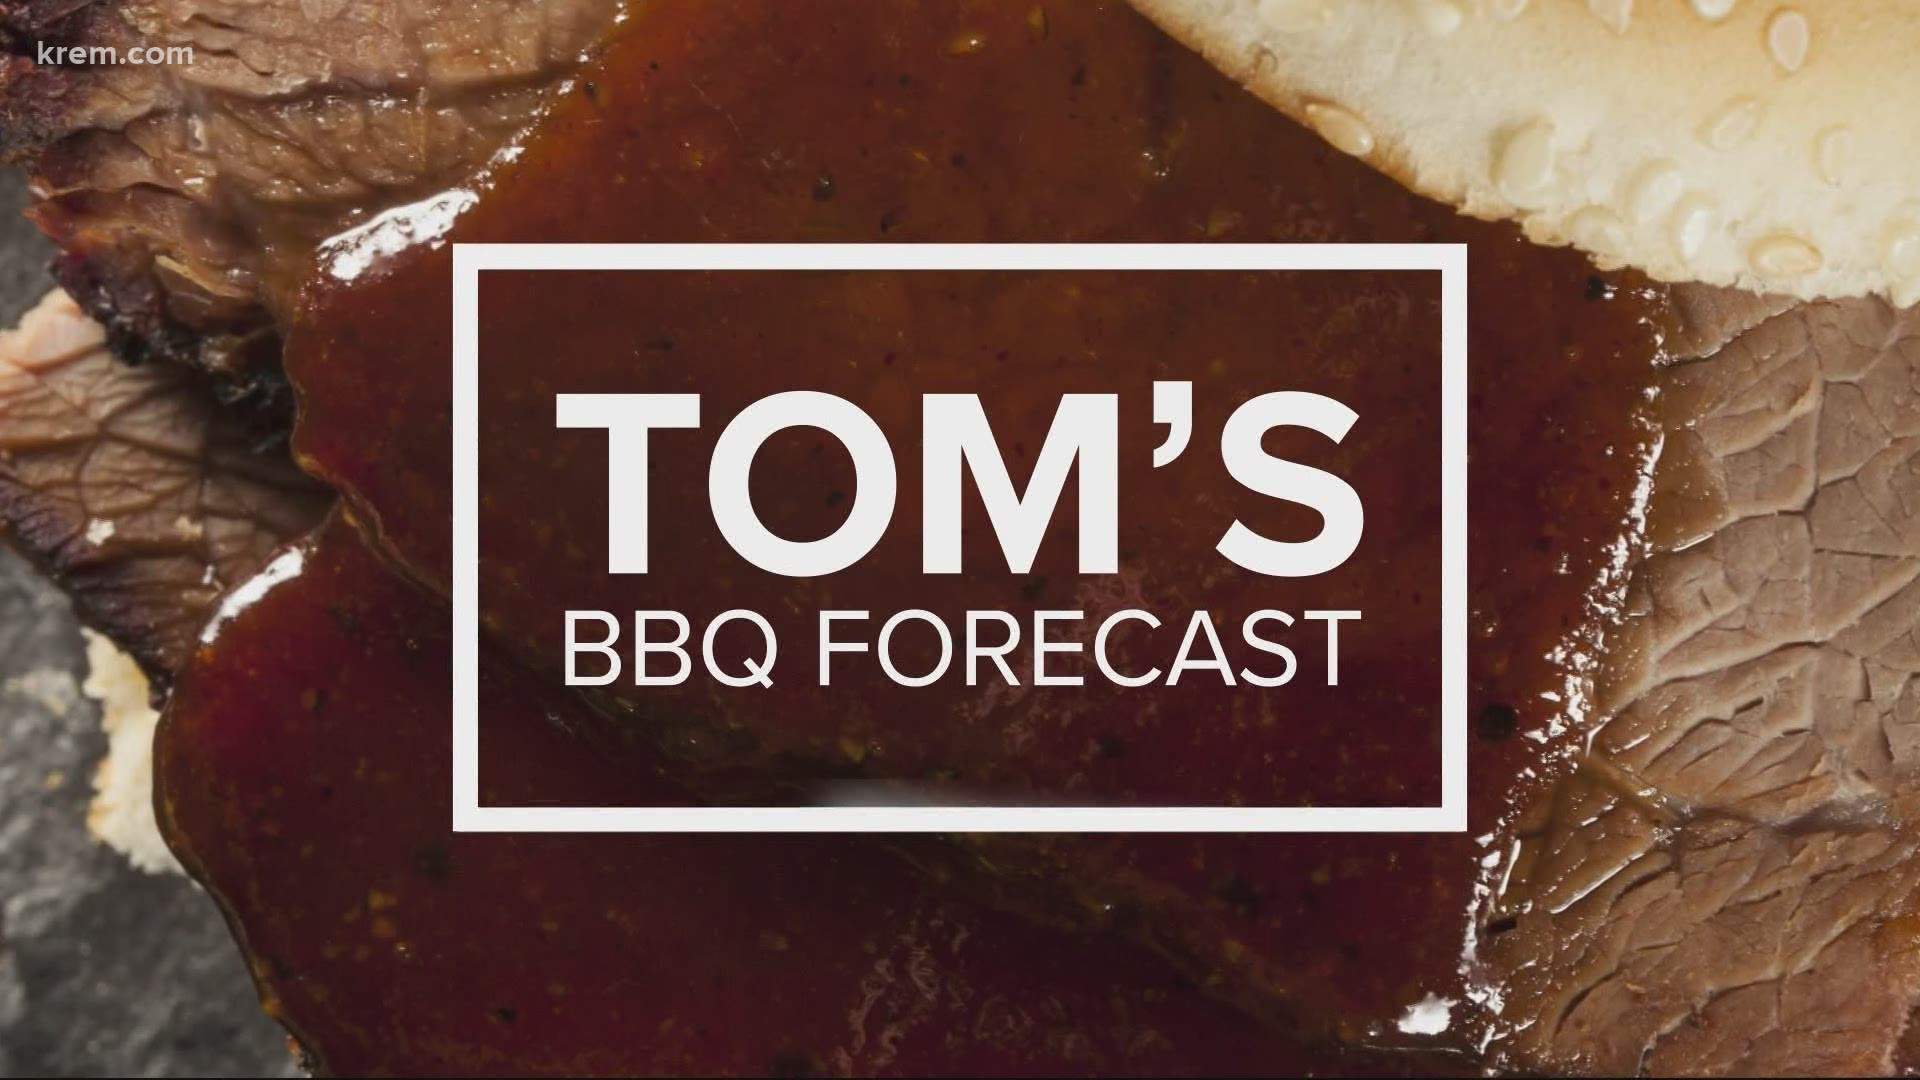 KREM's Tom Sherry is grilling up hot dogs and hamburgers just in time for Memorial Day Weekend!